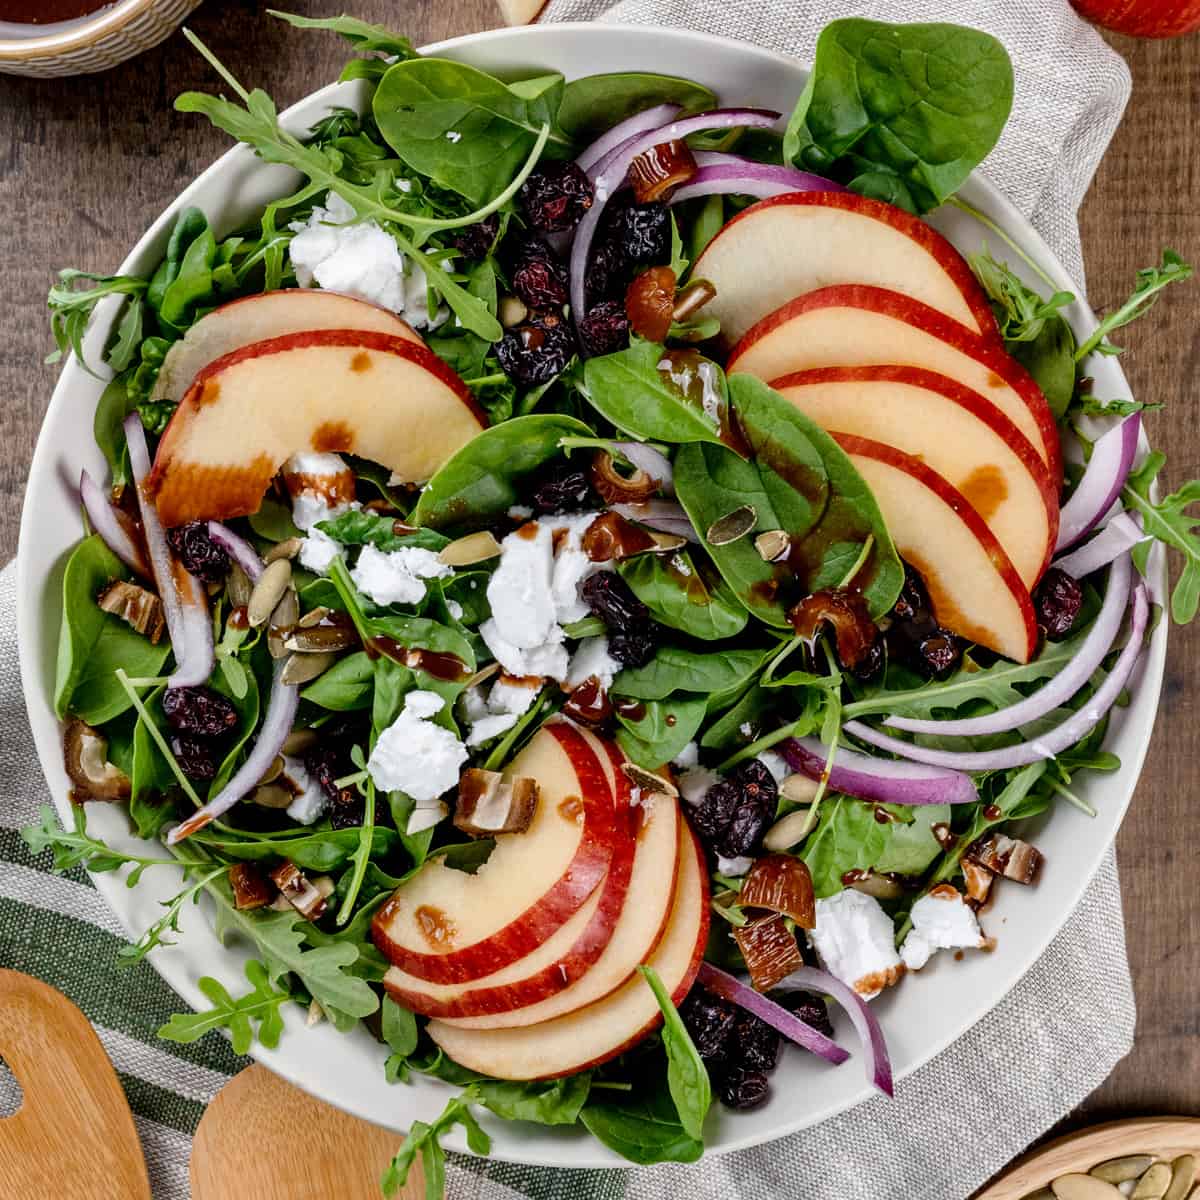 A big bowl filled with a fuji apple salad with apple slices, red onion, feta cheese, and balsamic dressing.